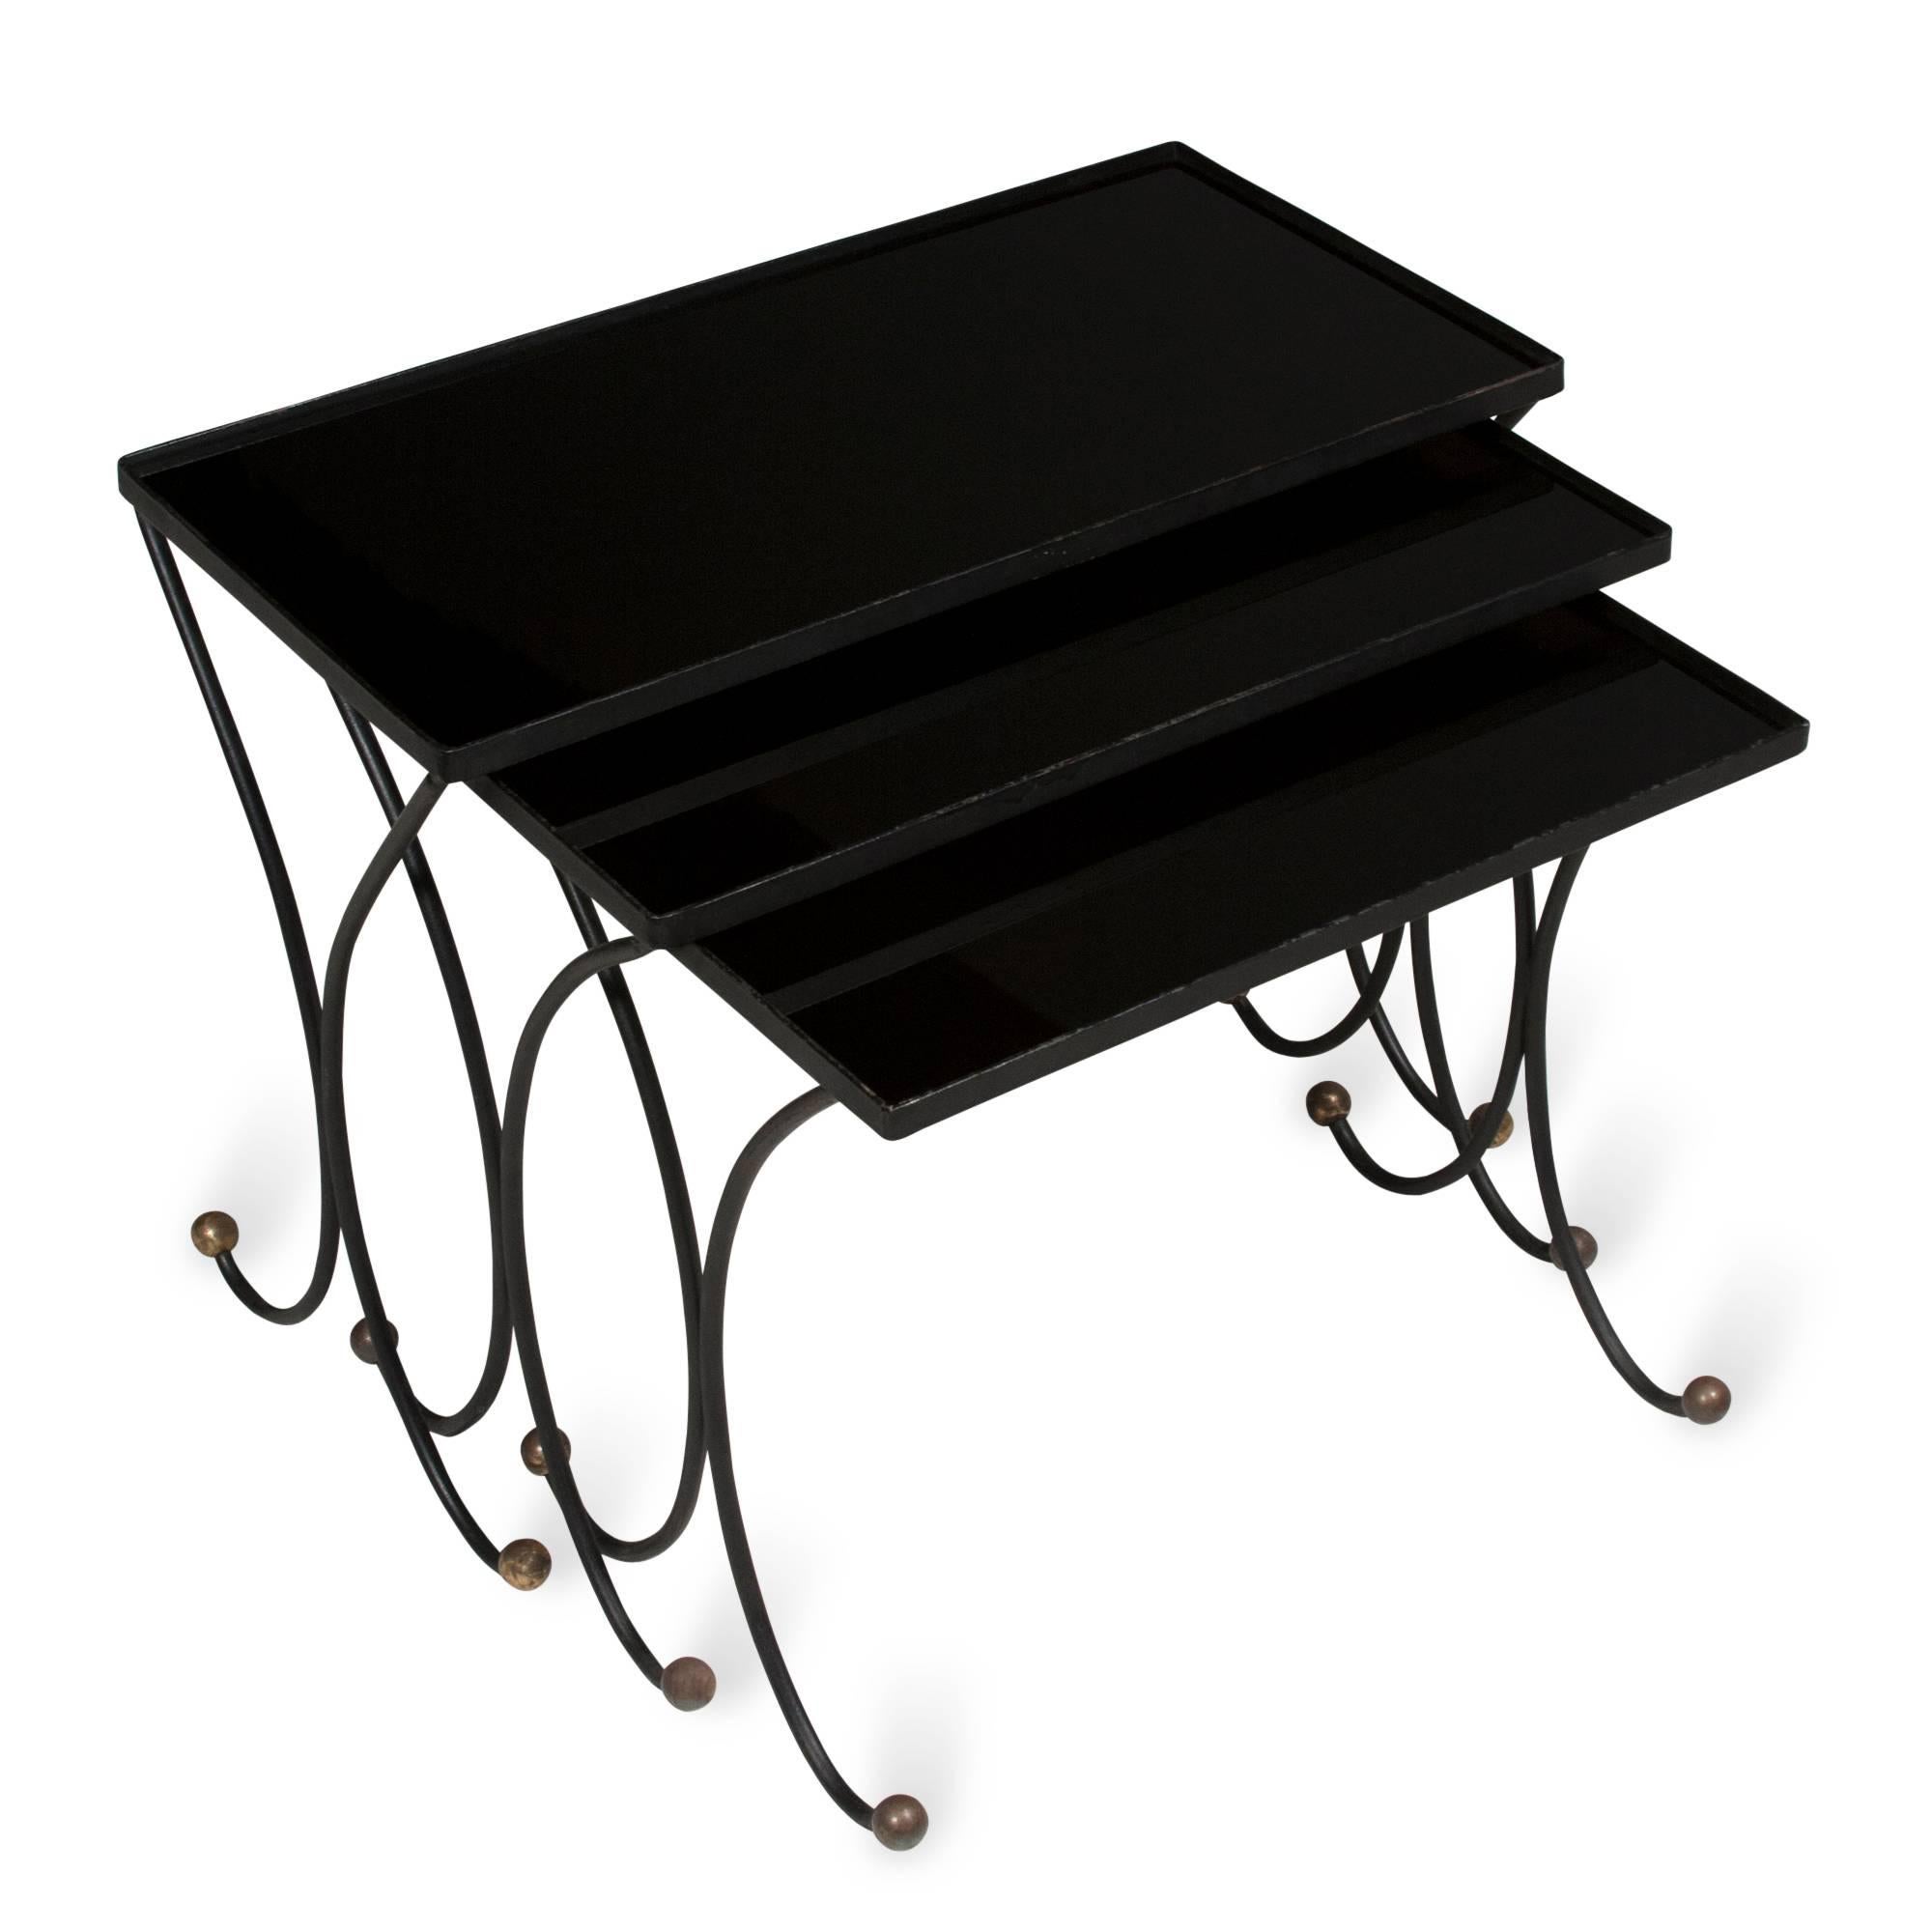 Jean Royère Style Nesting Tables In Excellent Condition For Sale In Brooklyn, NY